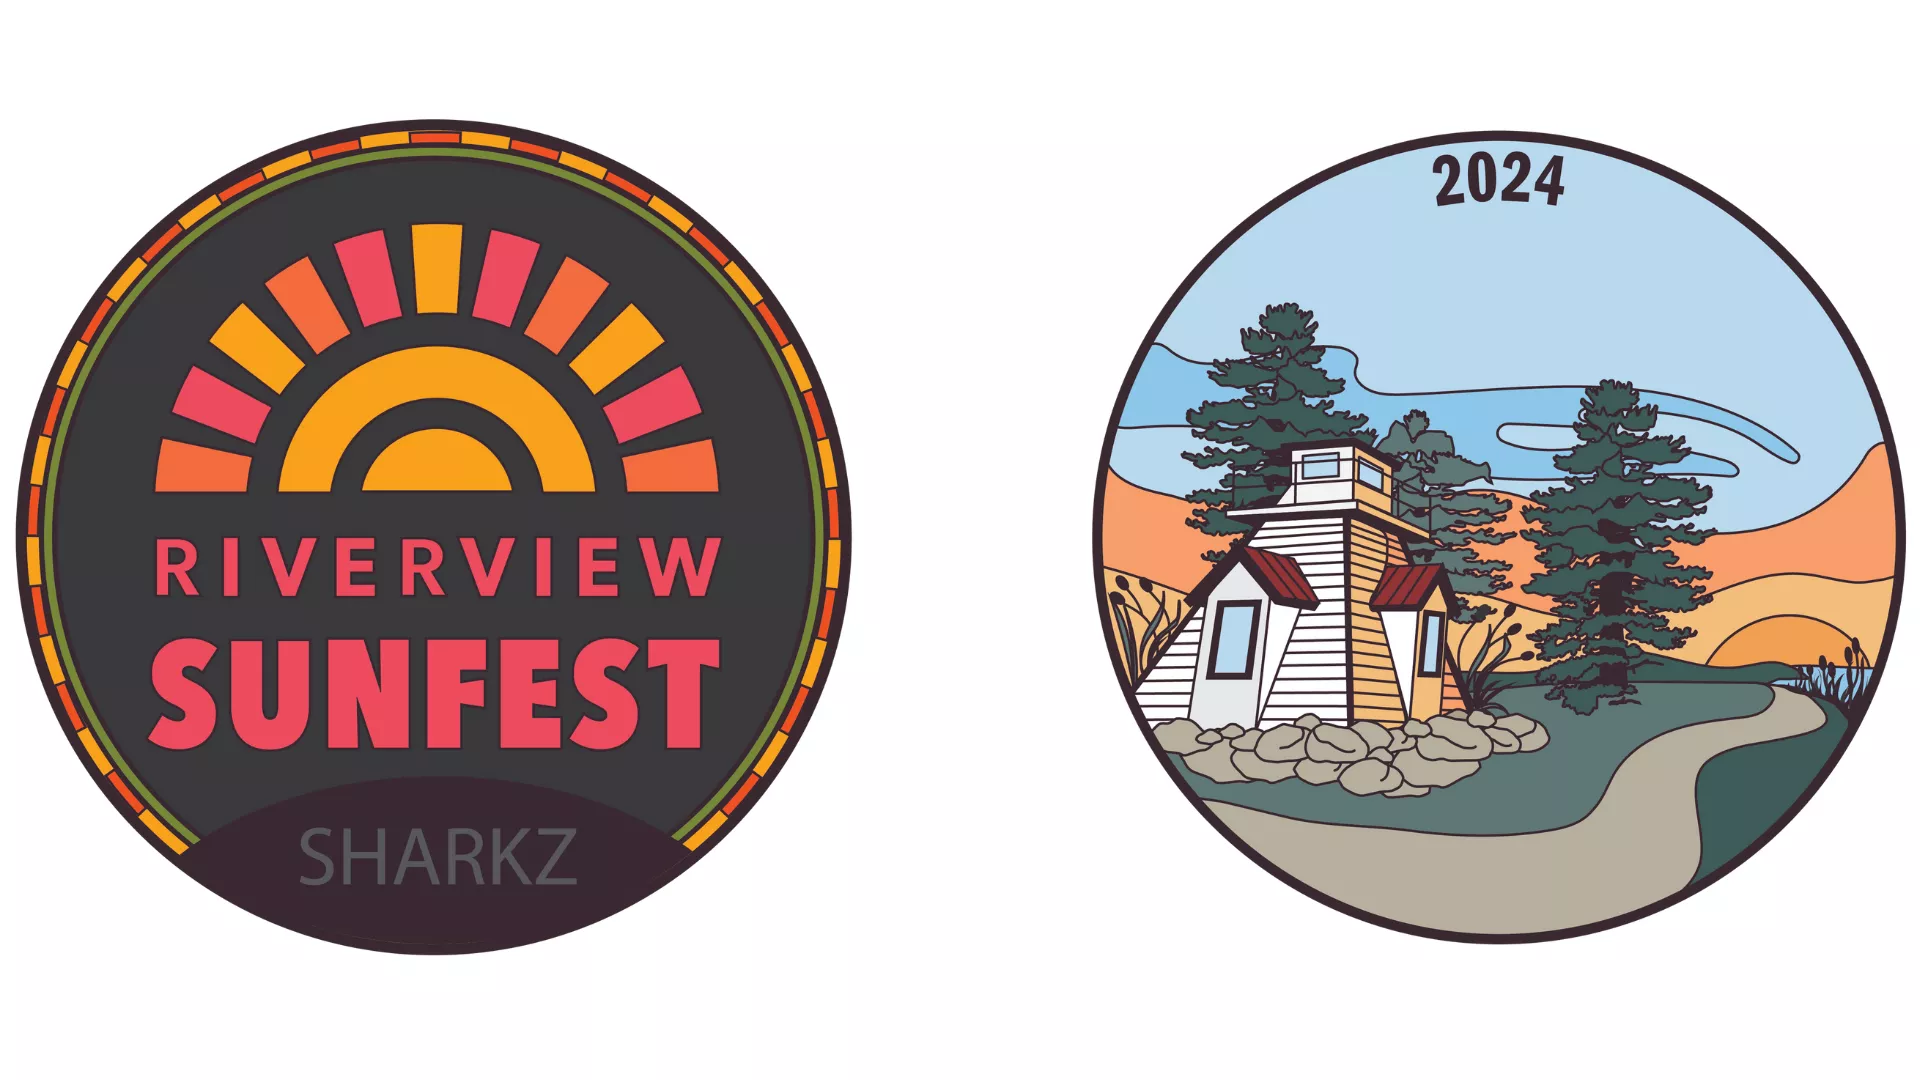 Photo of the 2024 SUNFEST Geocoin: Side 1 has the SUNFEST logo, Side 2 has a graphic design of the lighthouse on the Riverfront Trail with a sunset